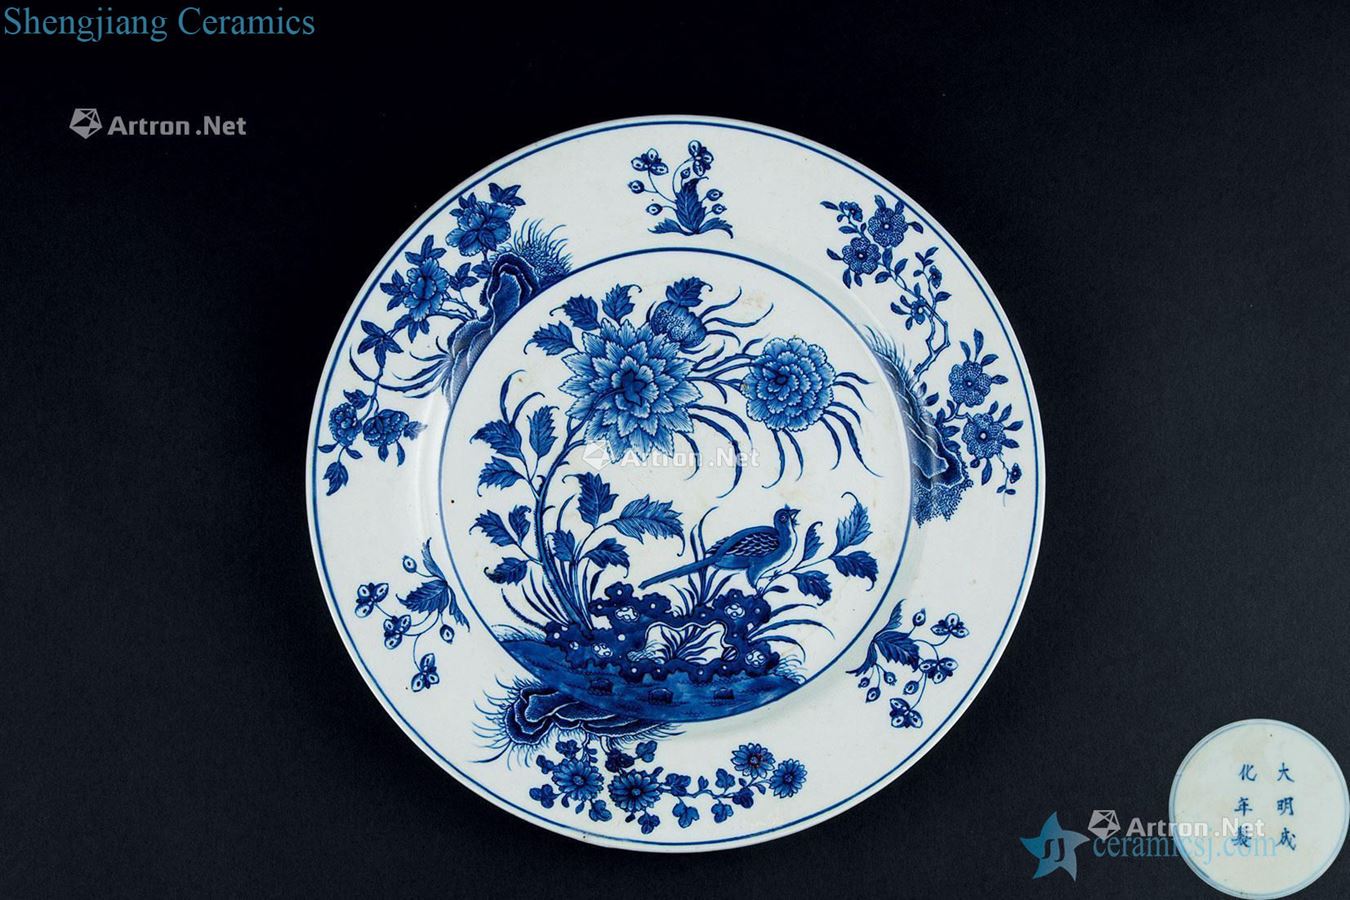 In the qing dynasty (1644-1911) blue and white flower on the tray